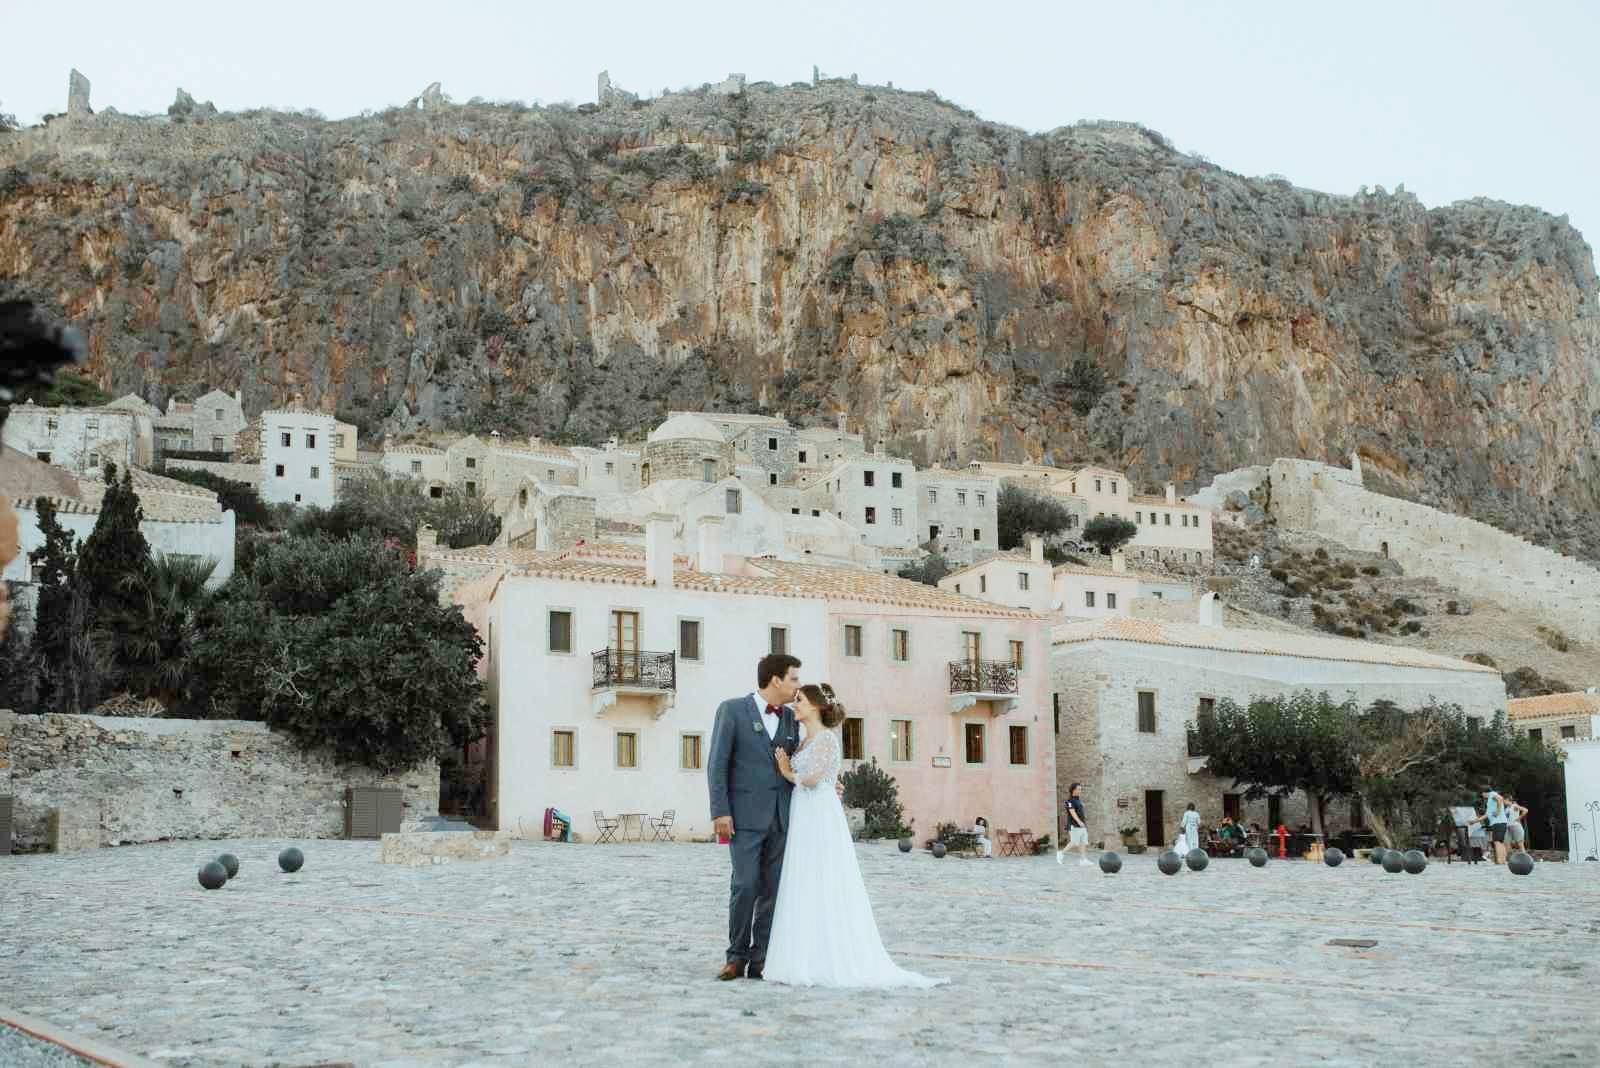 Get married in Monemvasia,Greece. A romantic place with stunning architecture, amazing stone buildings and washed out churches located inside the famous castle. The perfect place to eloped or get married with closest ones.